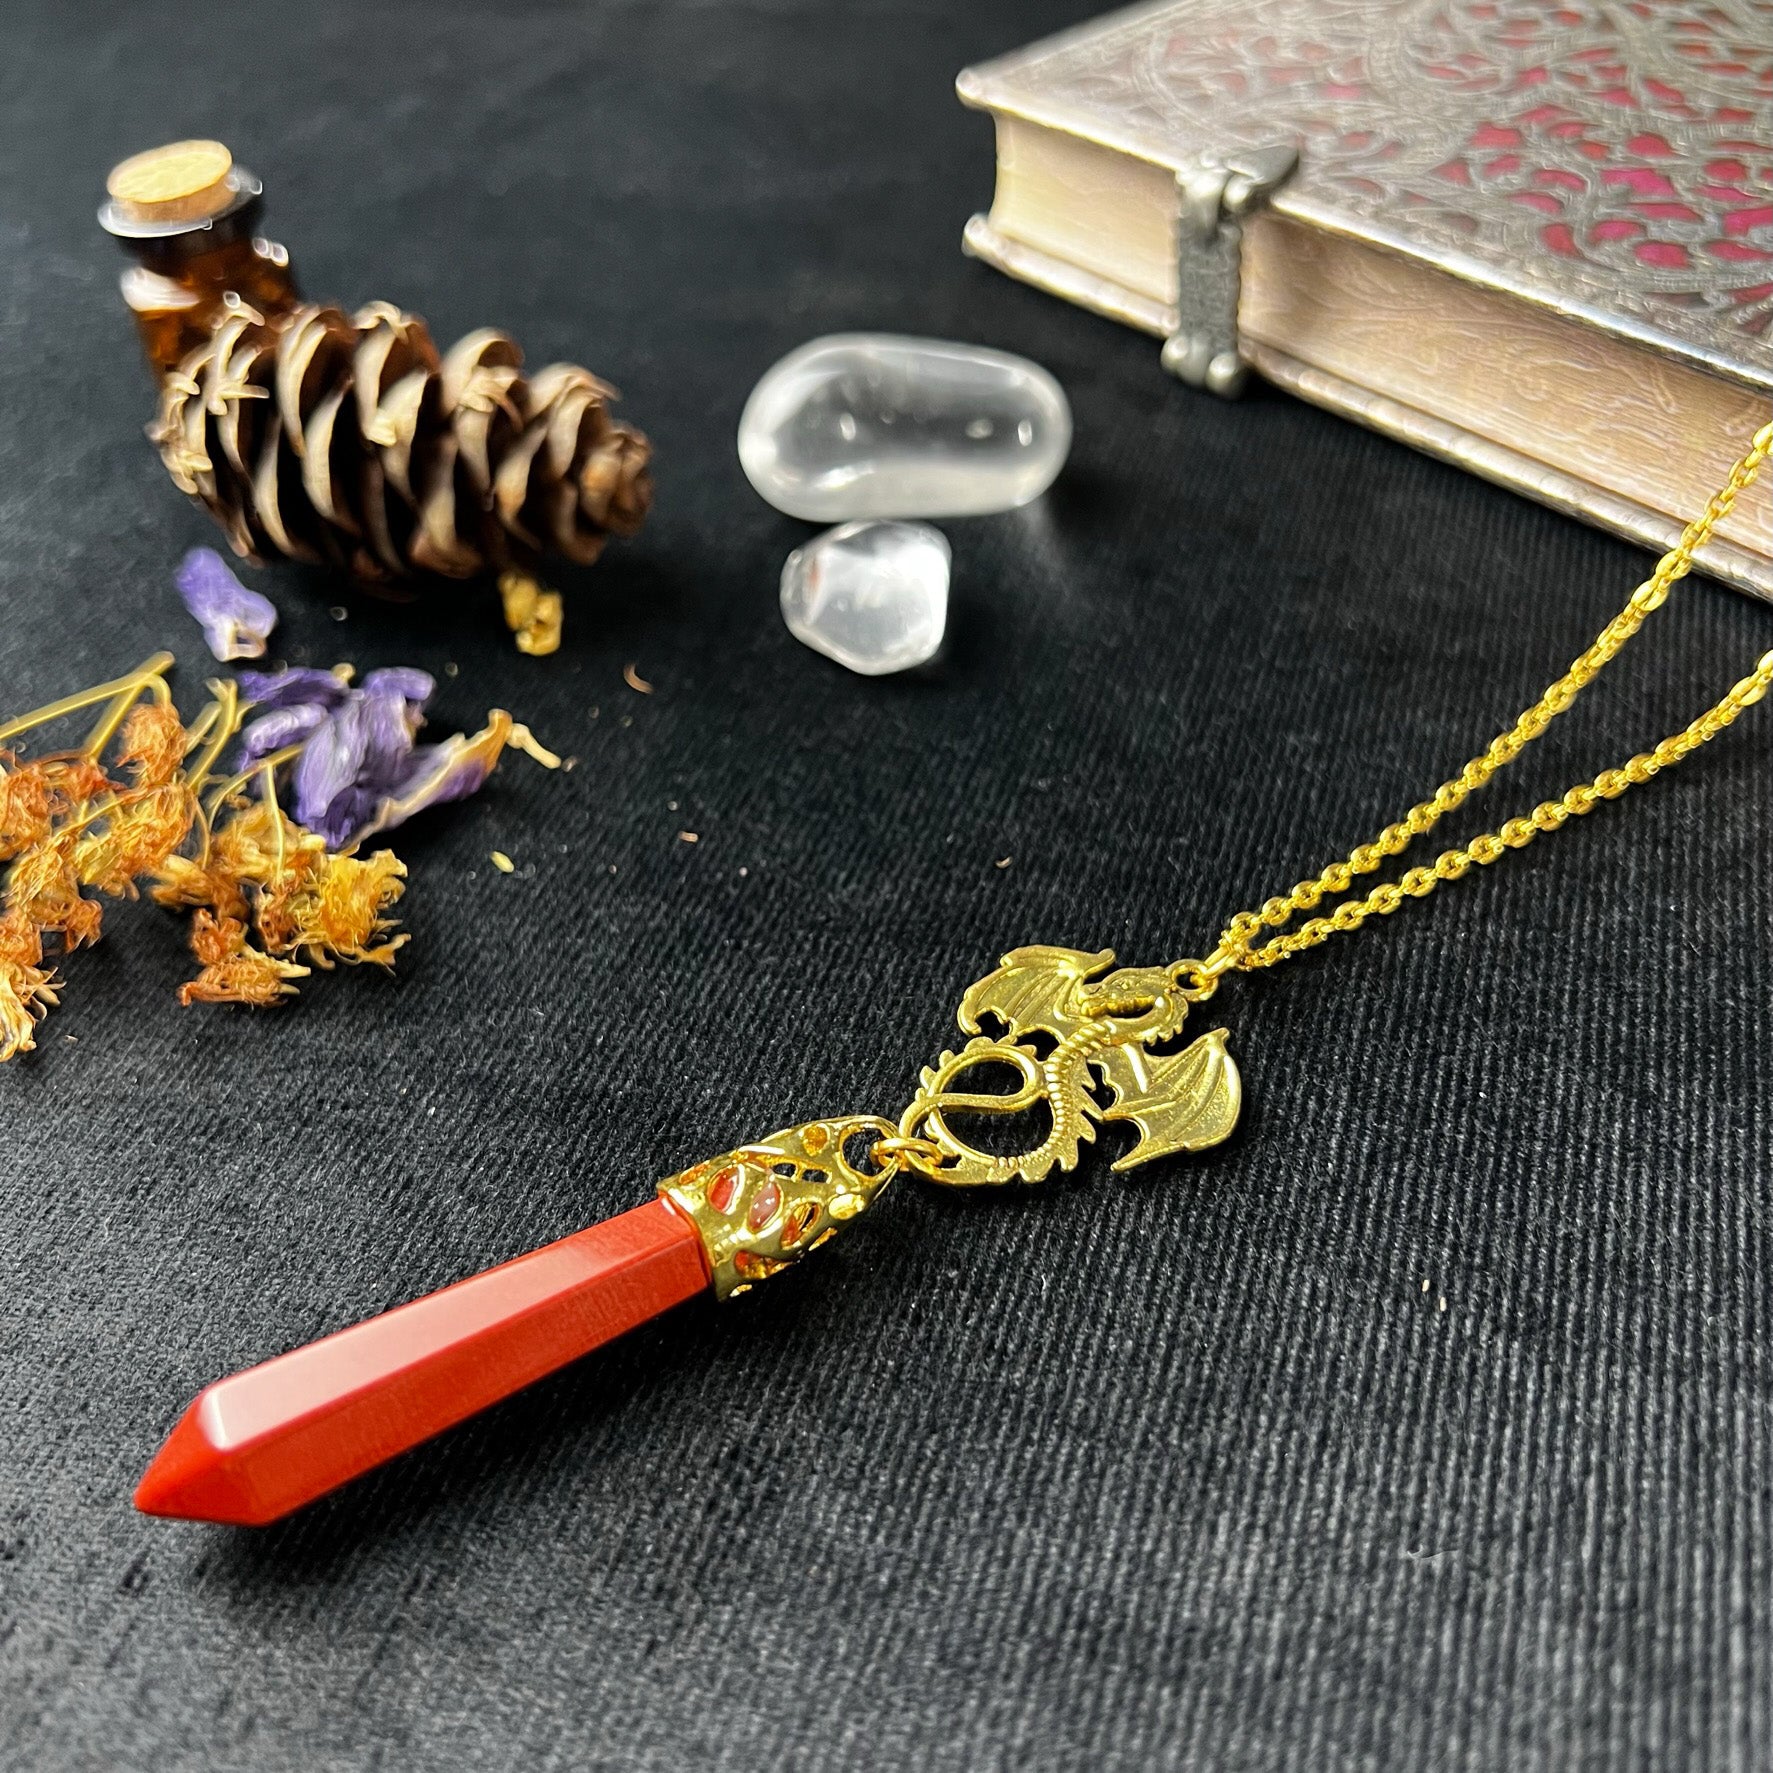 Golden red jasper and dragon divination pendulum necklace - The French Witch shop